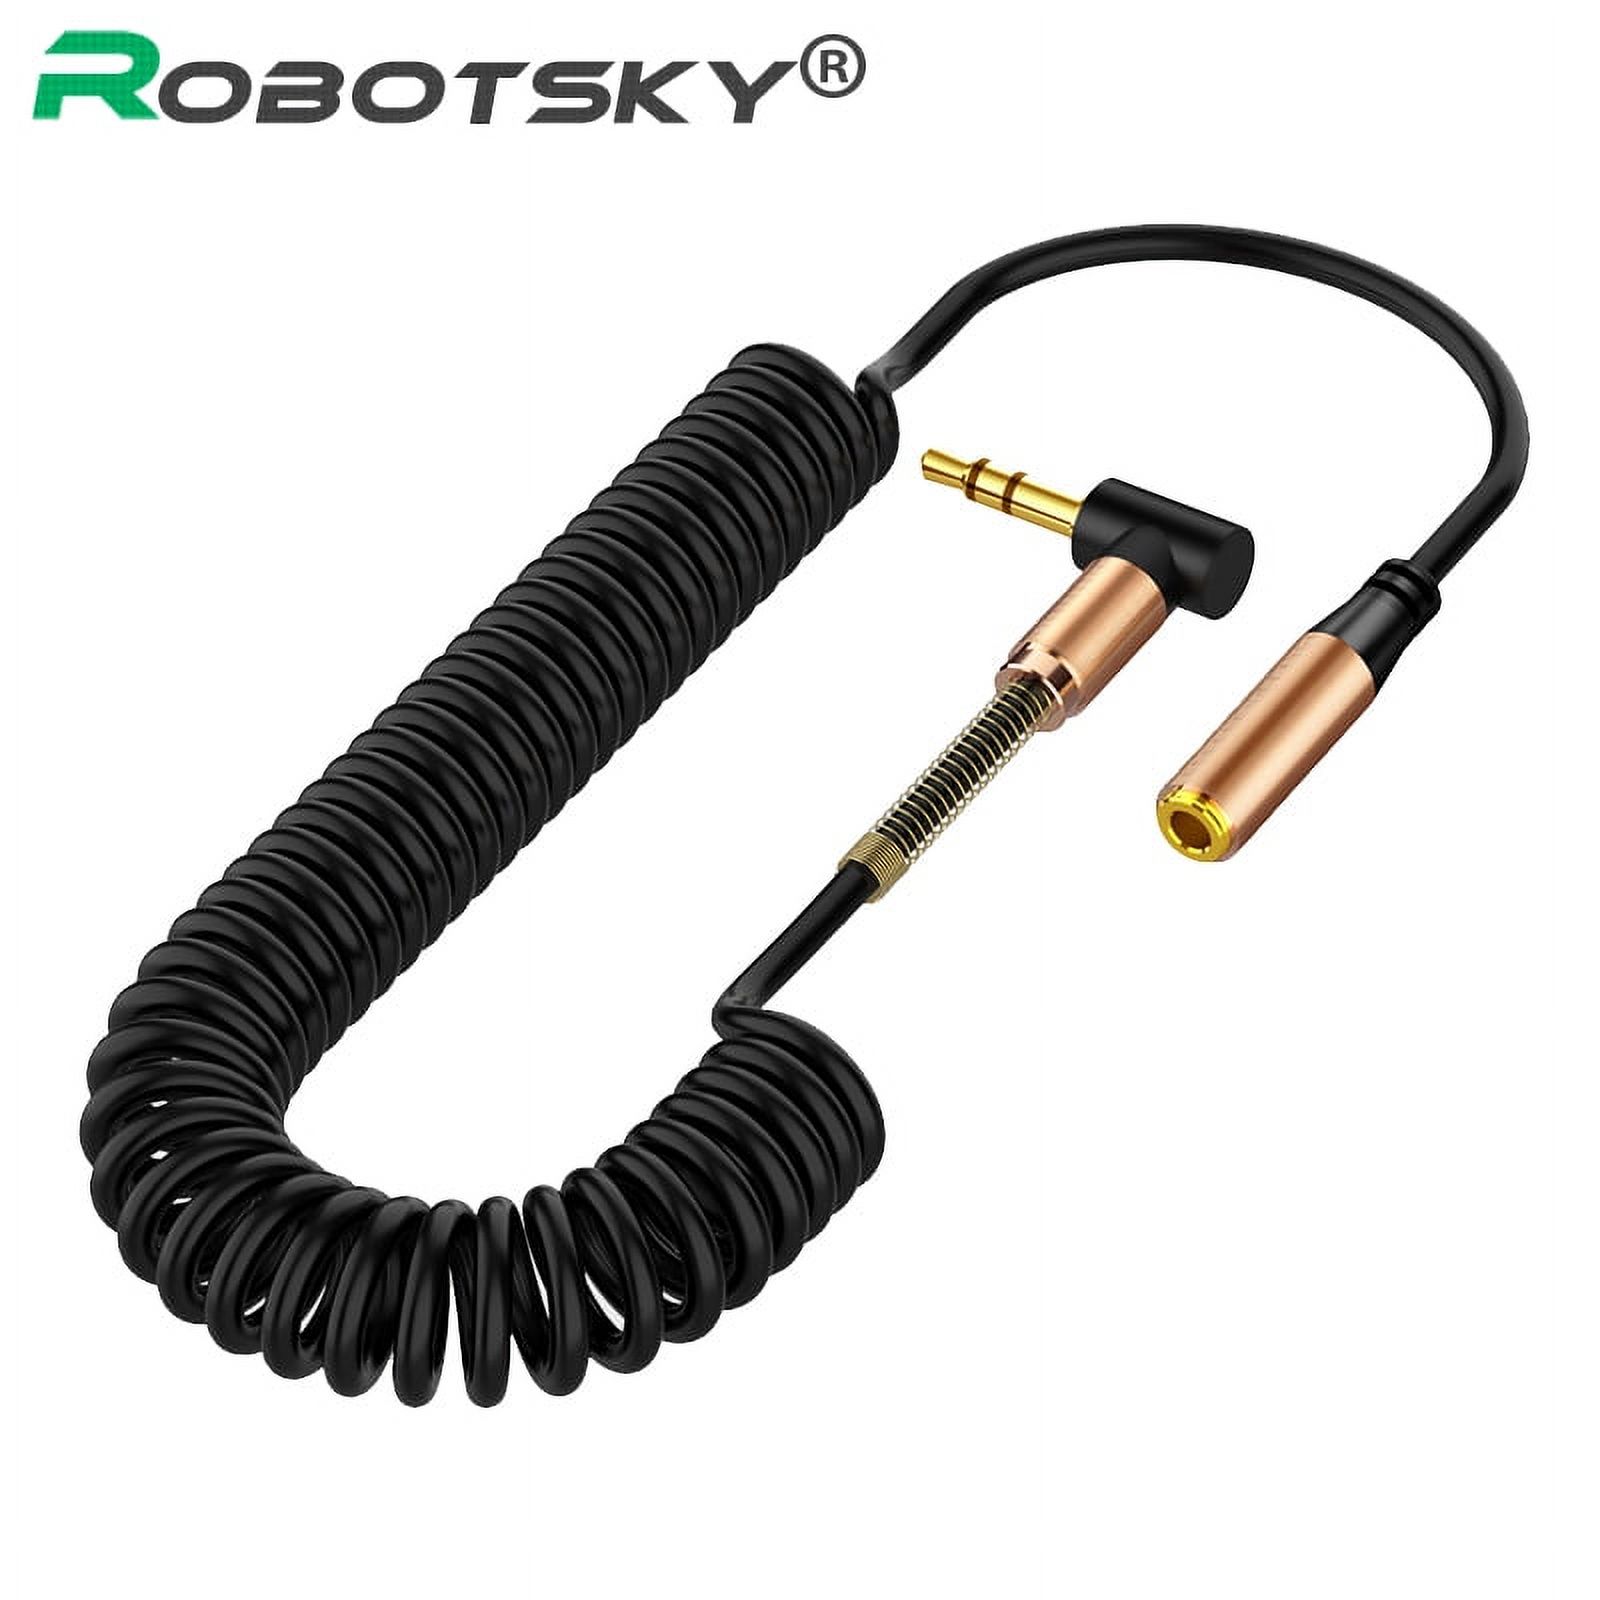 3.5mm Audio Cable Male to Female AUX Extension Wire Elbow Spring Retractable Audio Speaker Telescopic Cable HIFI Sound Quality - image 2 of 8